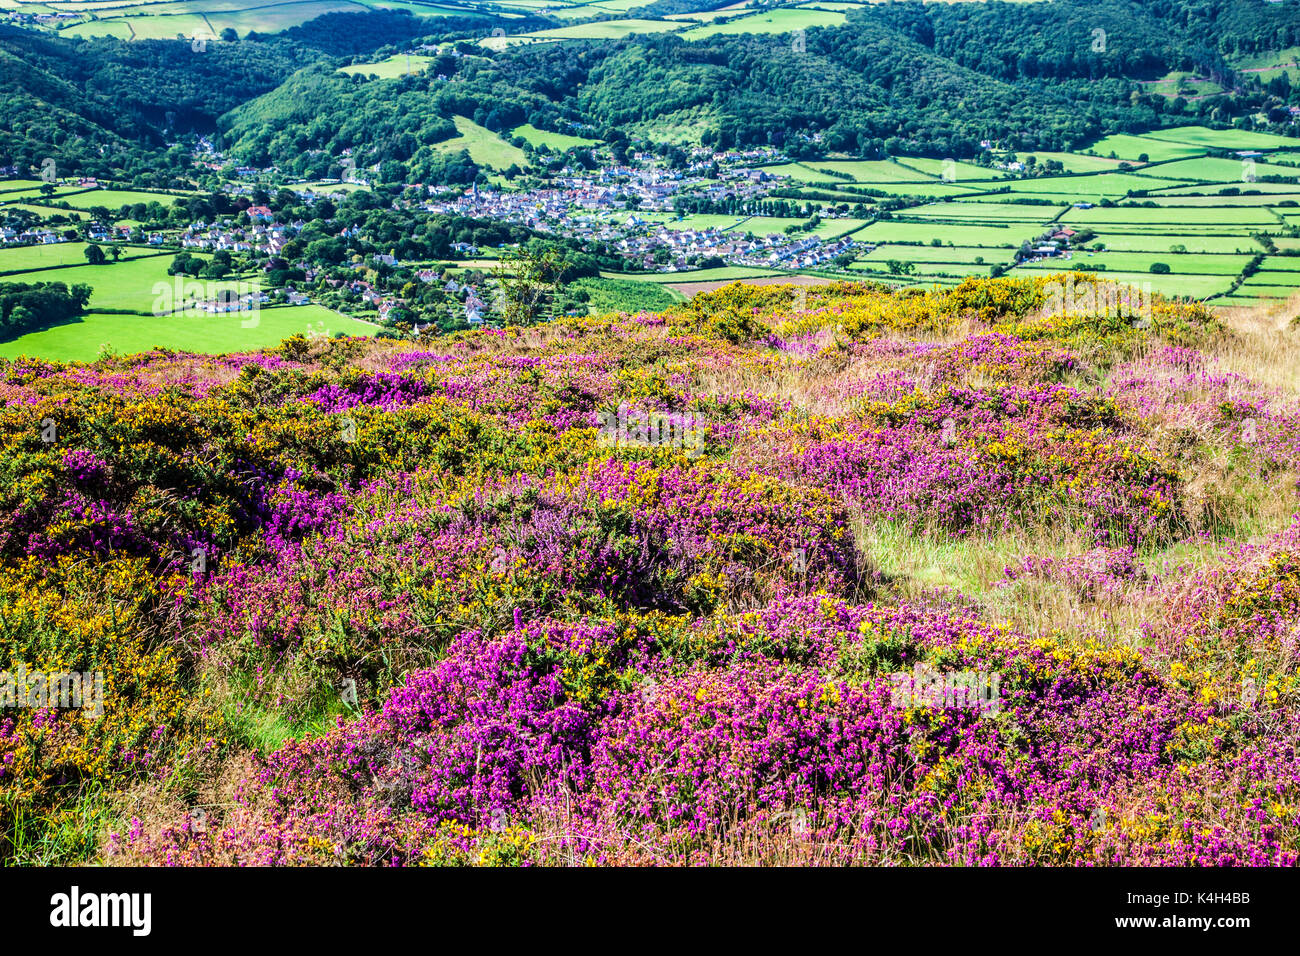 The view over Porlock in the Exmoor National Park, Somerset. Stock Photo